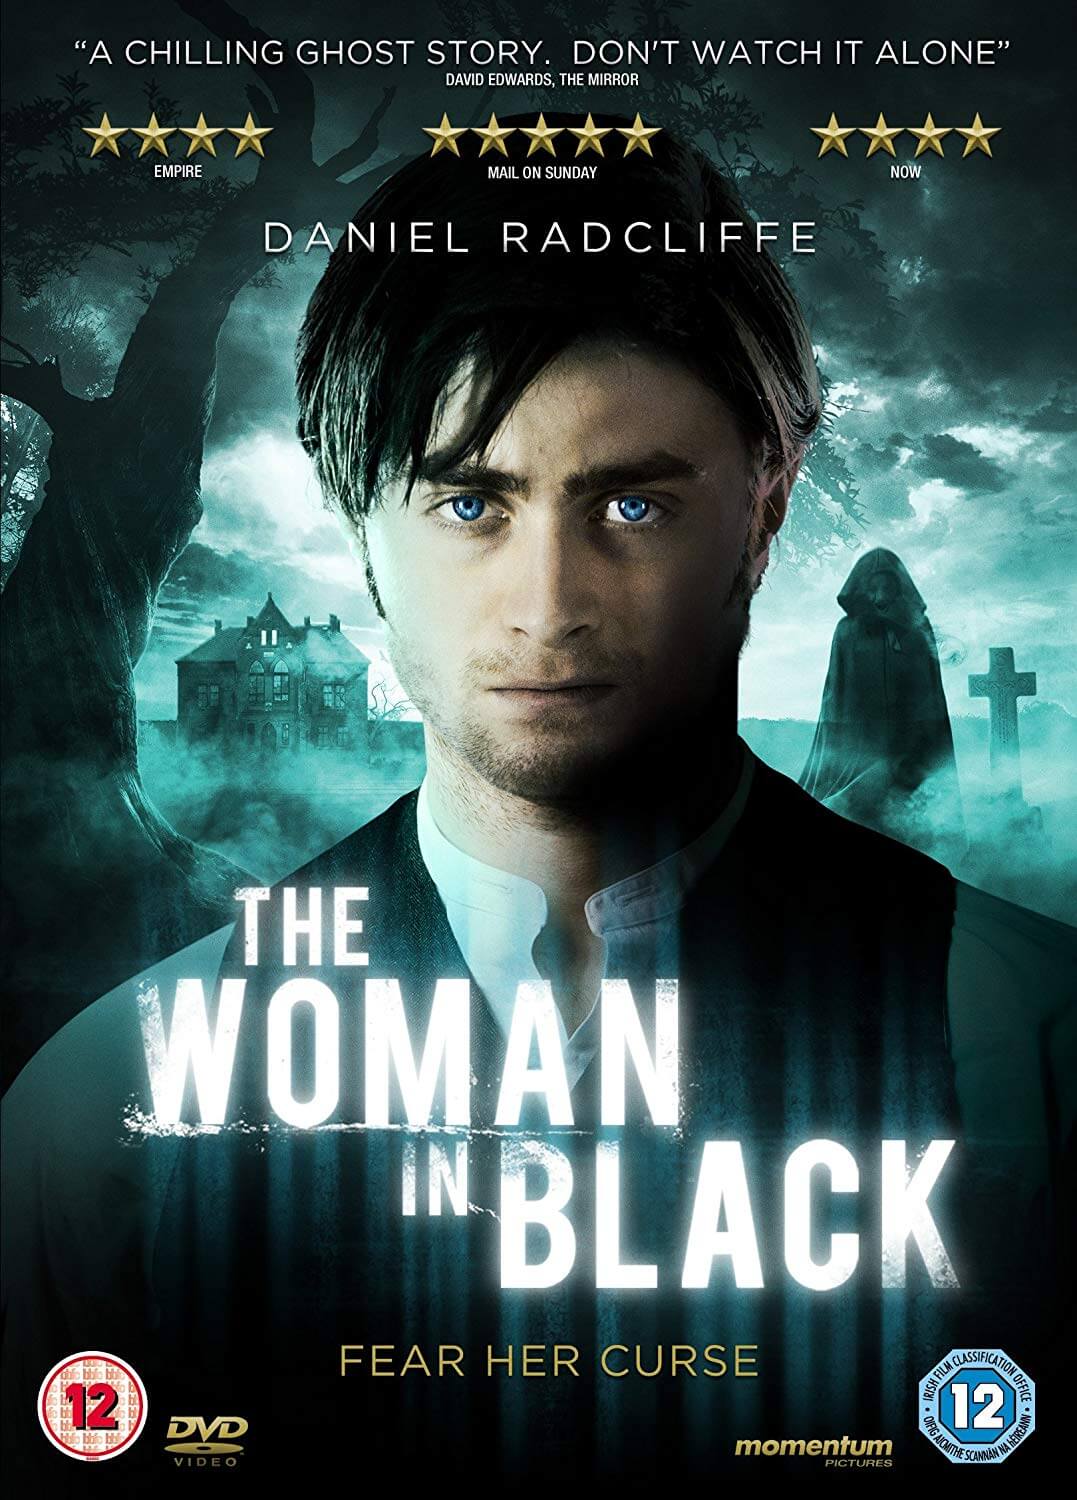 The Woman in Black DVD Cover